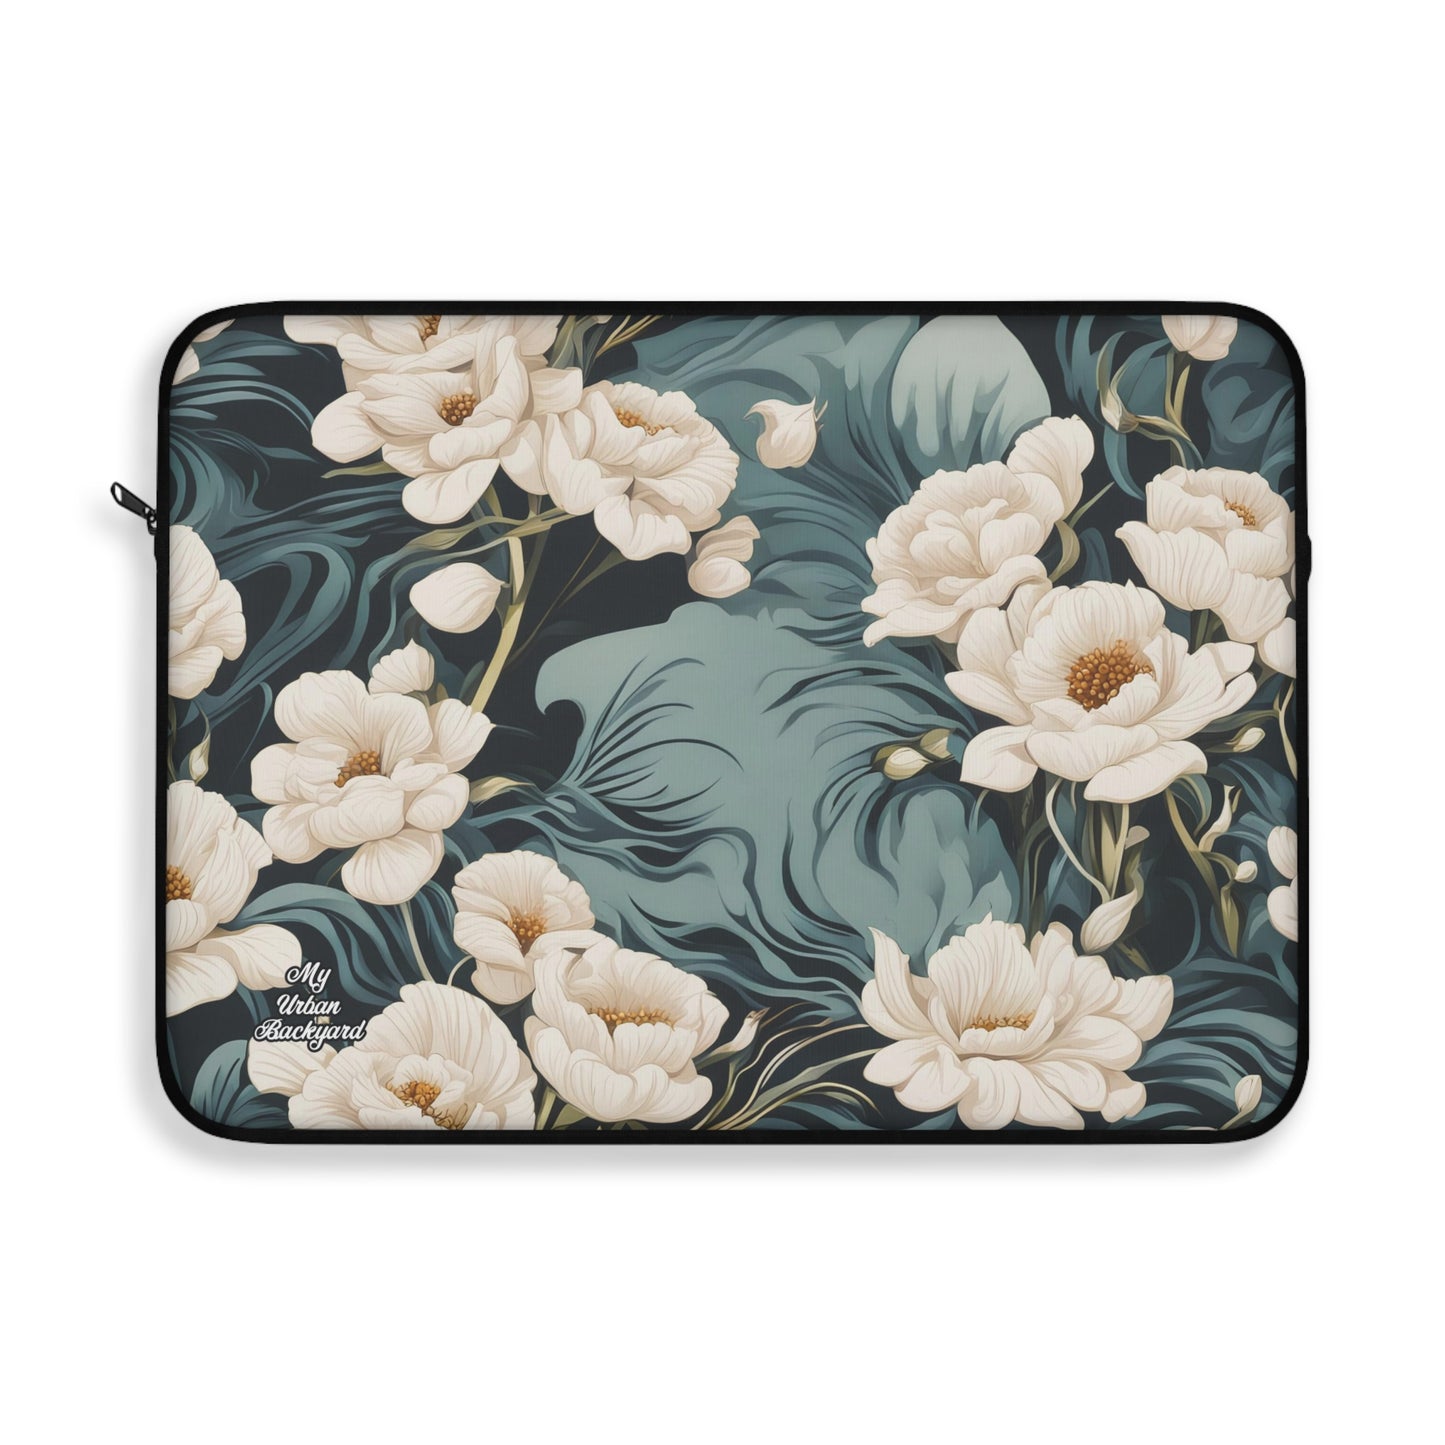 Winter Flowers, Laptop Carrying Case, Top Loading Sleeve for School or Work